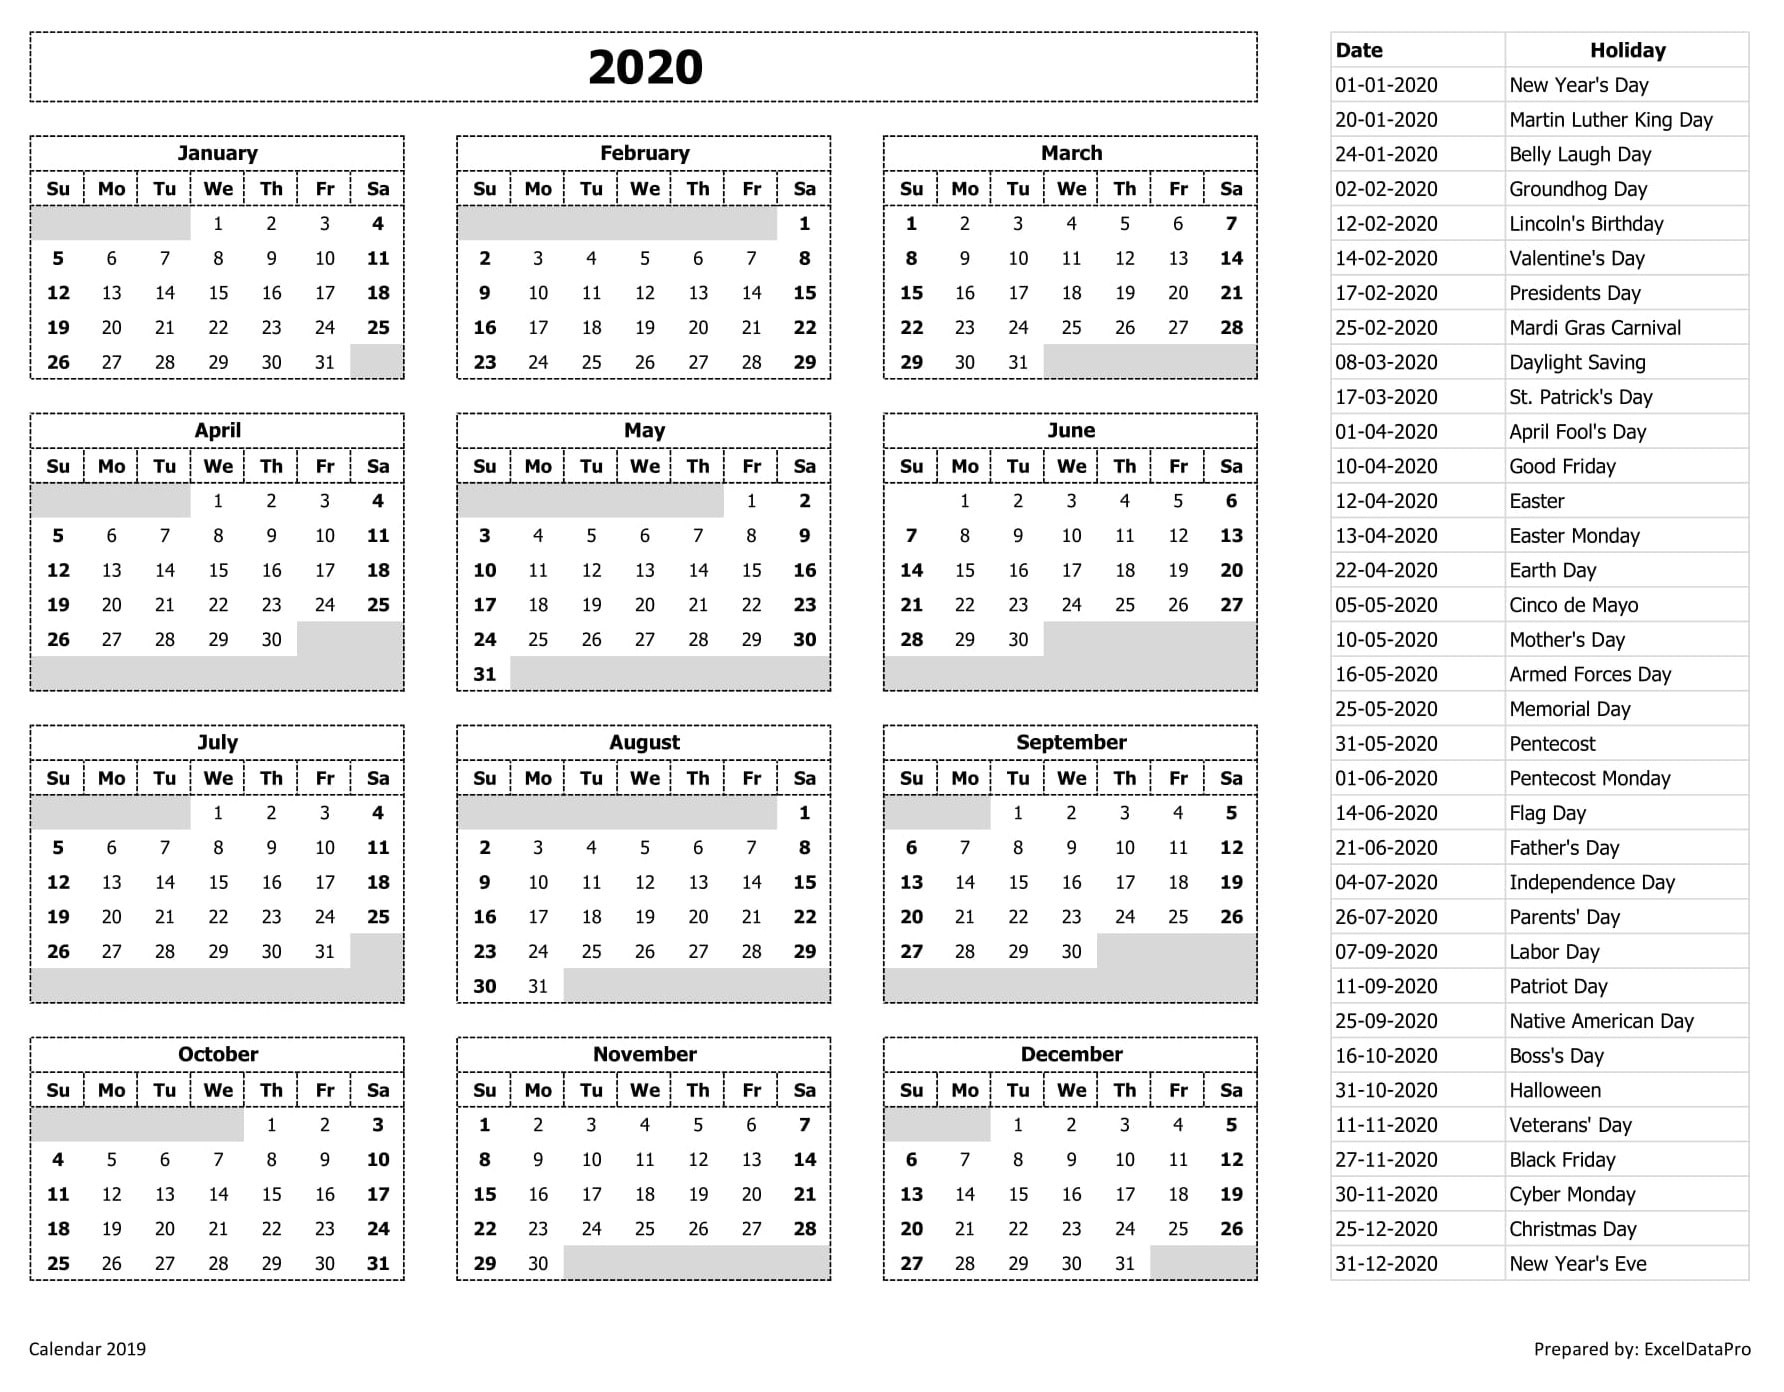 2020 Calendar Excel Templates, Printable Pdfs &amp; Images-2020 Calendar With Holidays In India Pdf